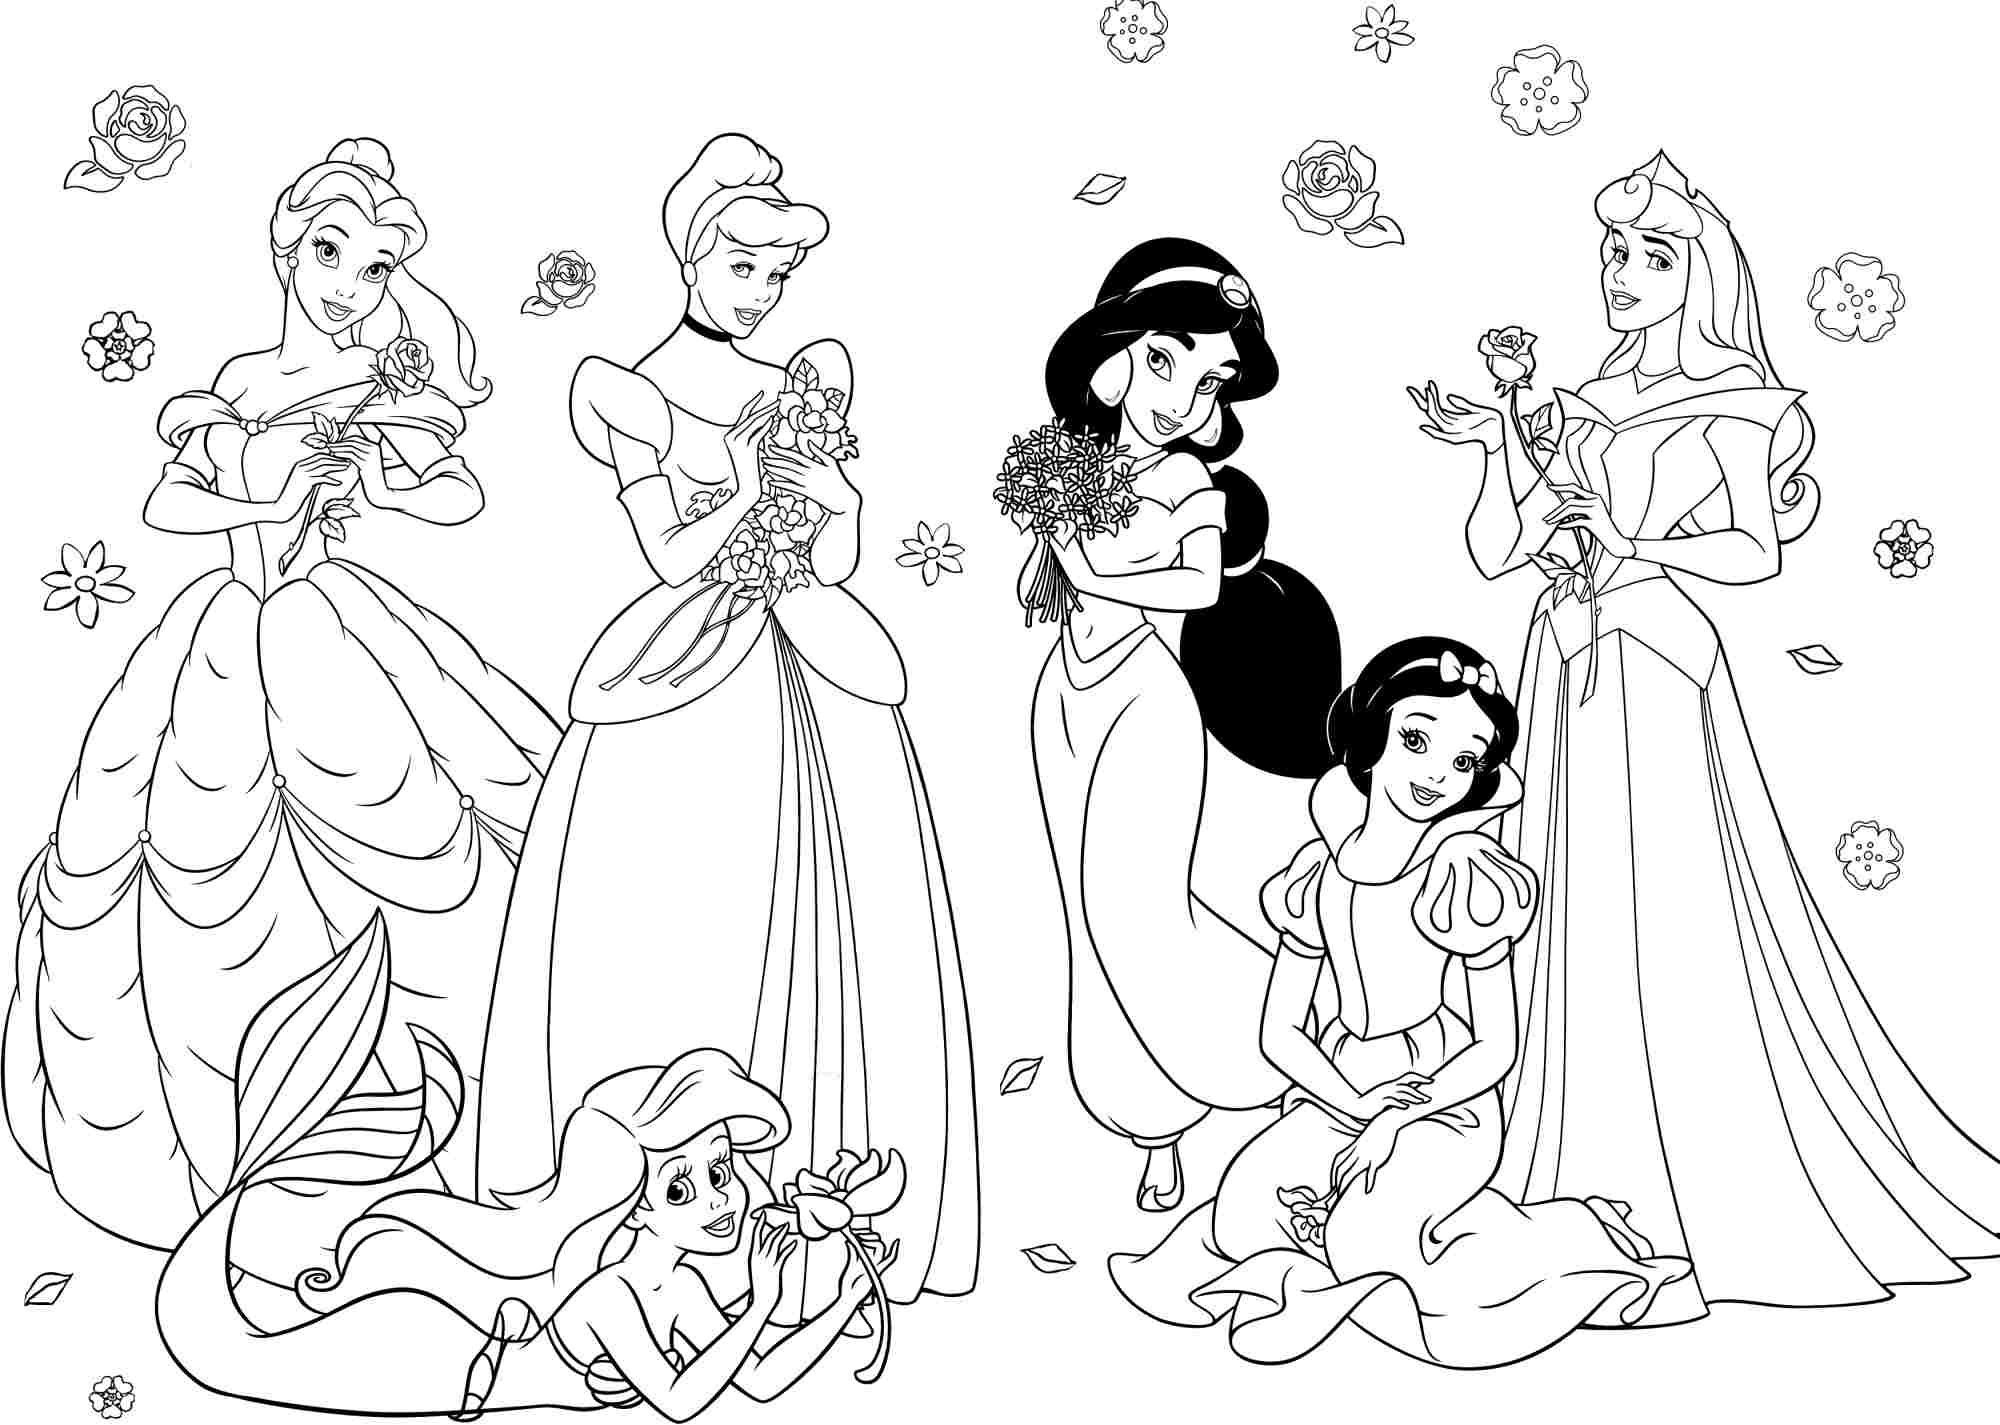 Princess Coloring Pages For Girls - Free Large Images | Crafting - Free Printable Princess Coloring Pages